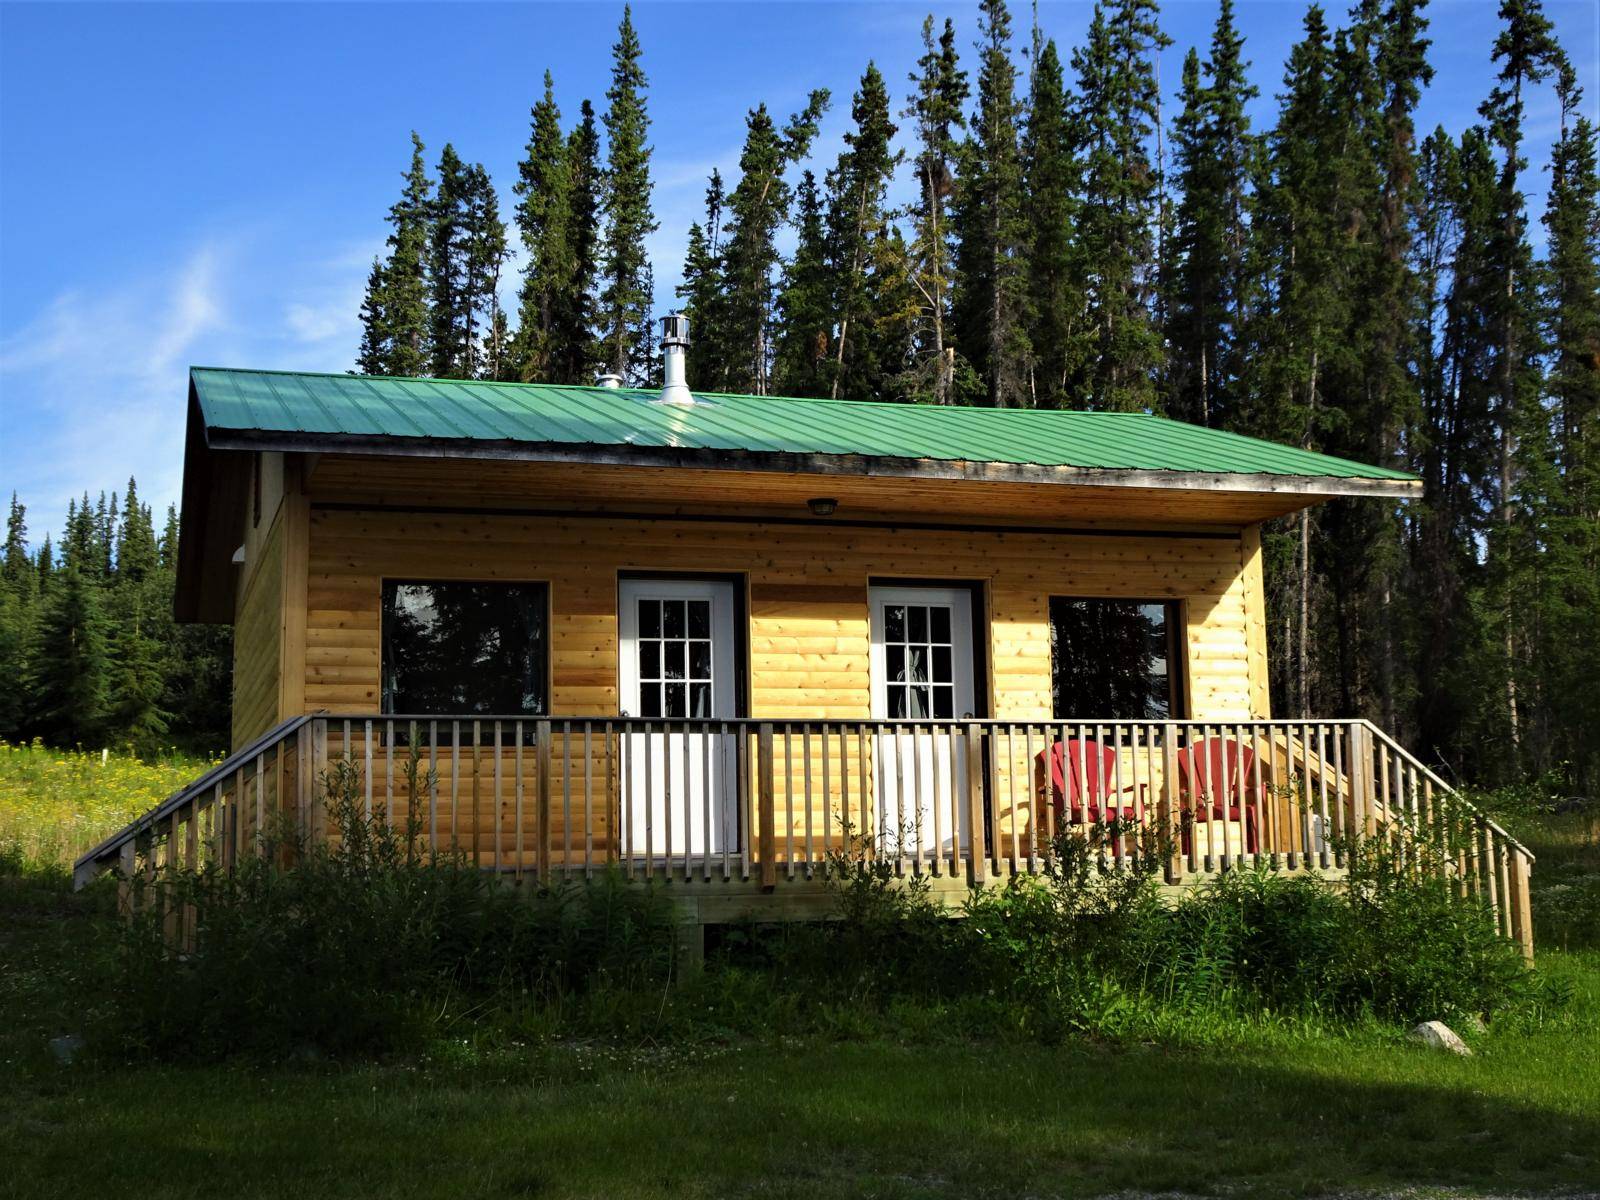 Standard lakefront cabin front view in summer